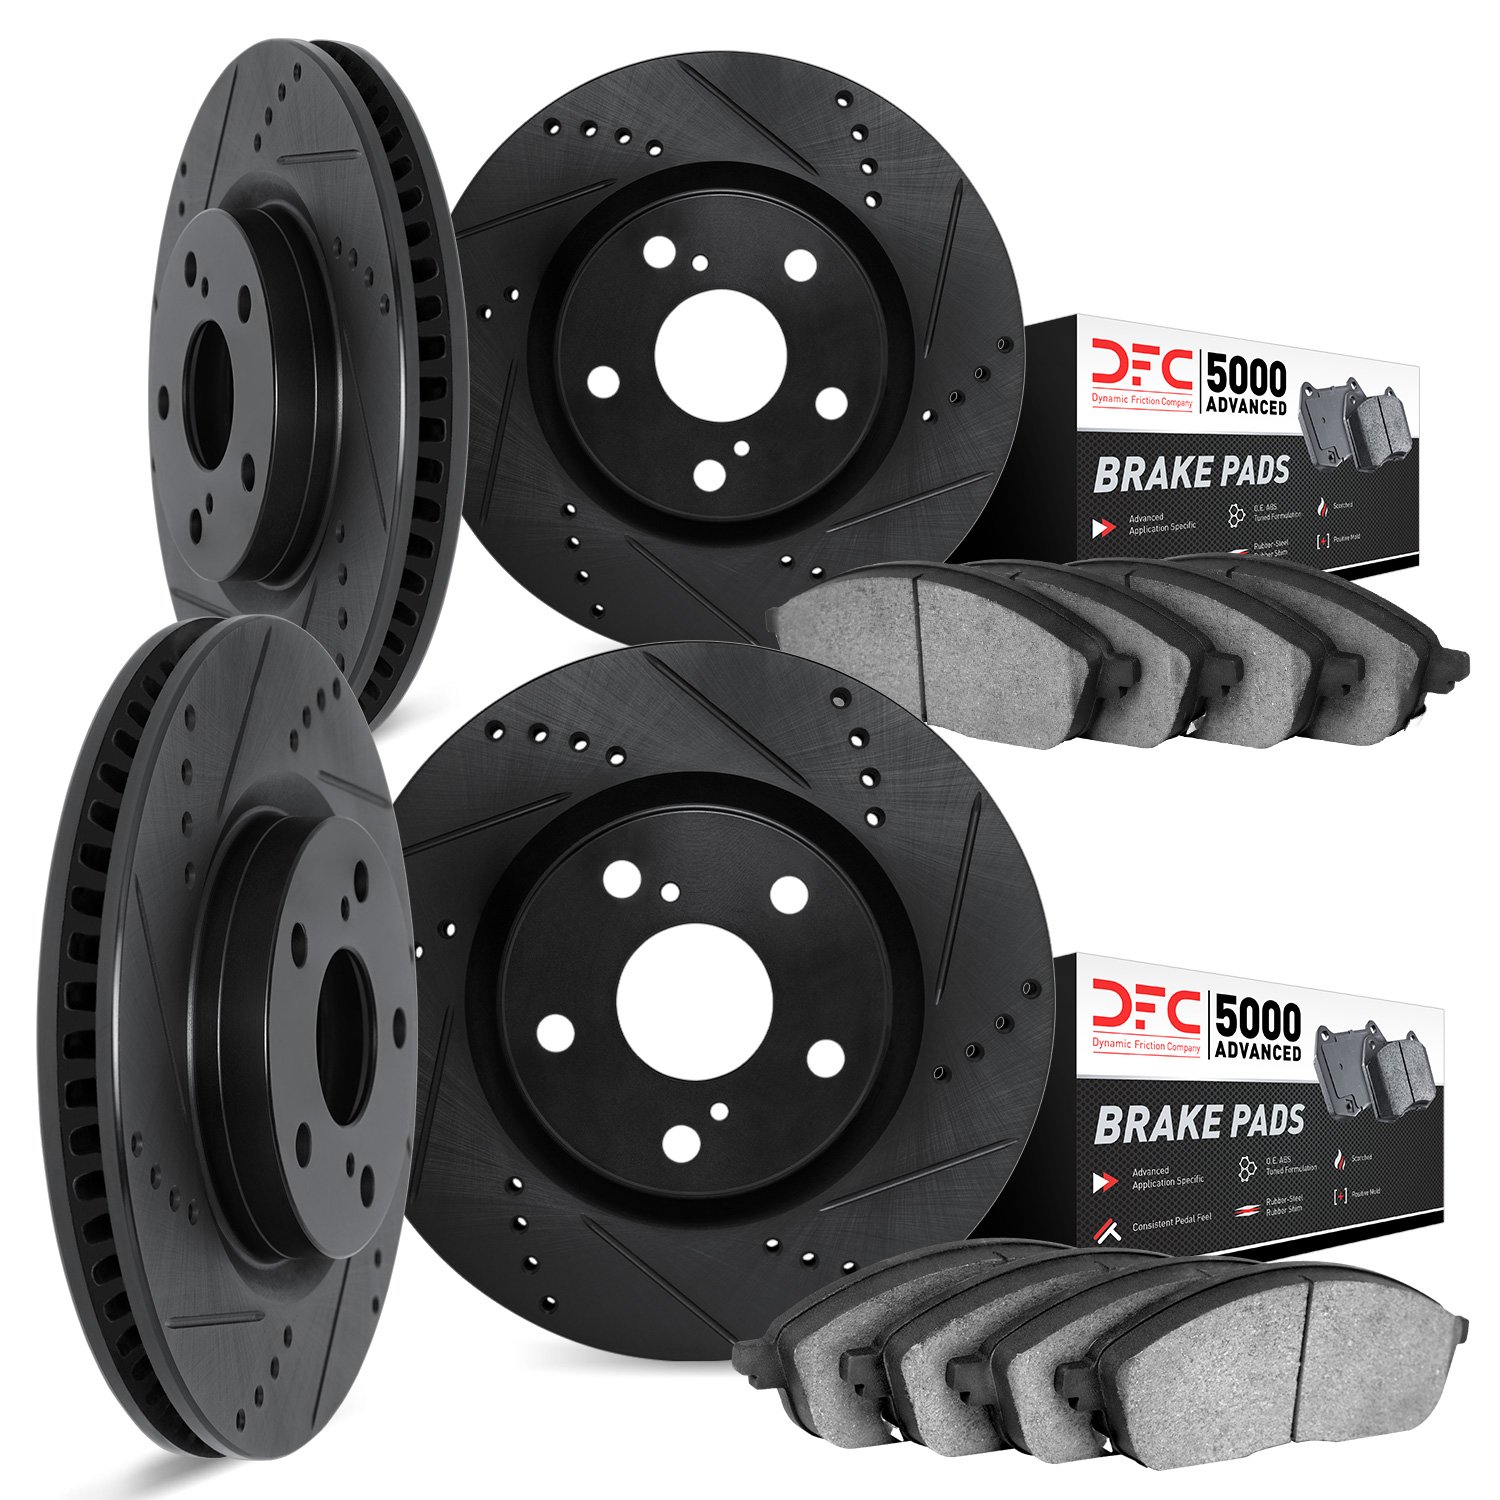 8504-13021 Drilled/Slotted Brake Rotors w/5000 Advanced Brake Pads Kit [Black], Fits Select Subaru, Position: Front and Rear